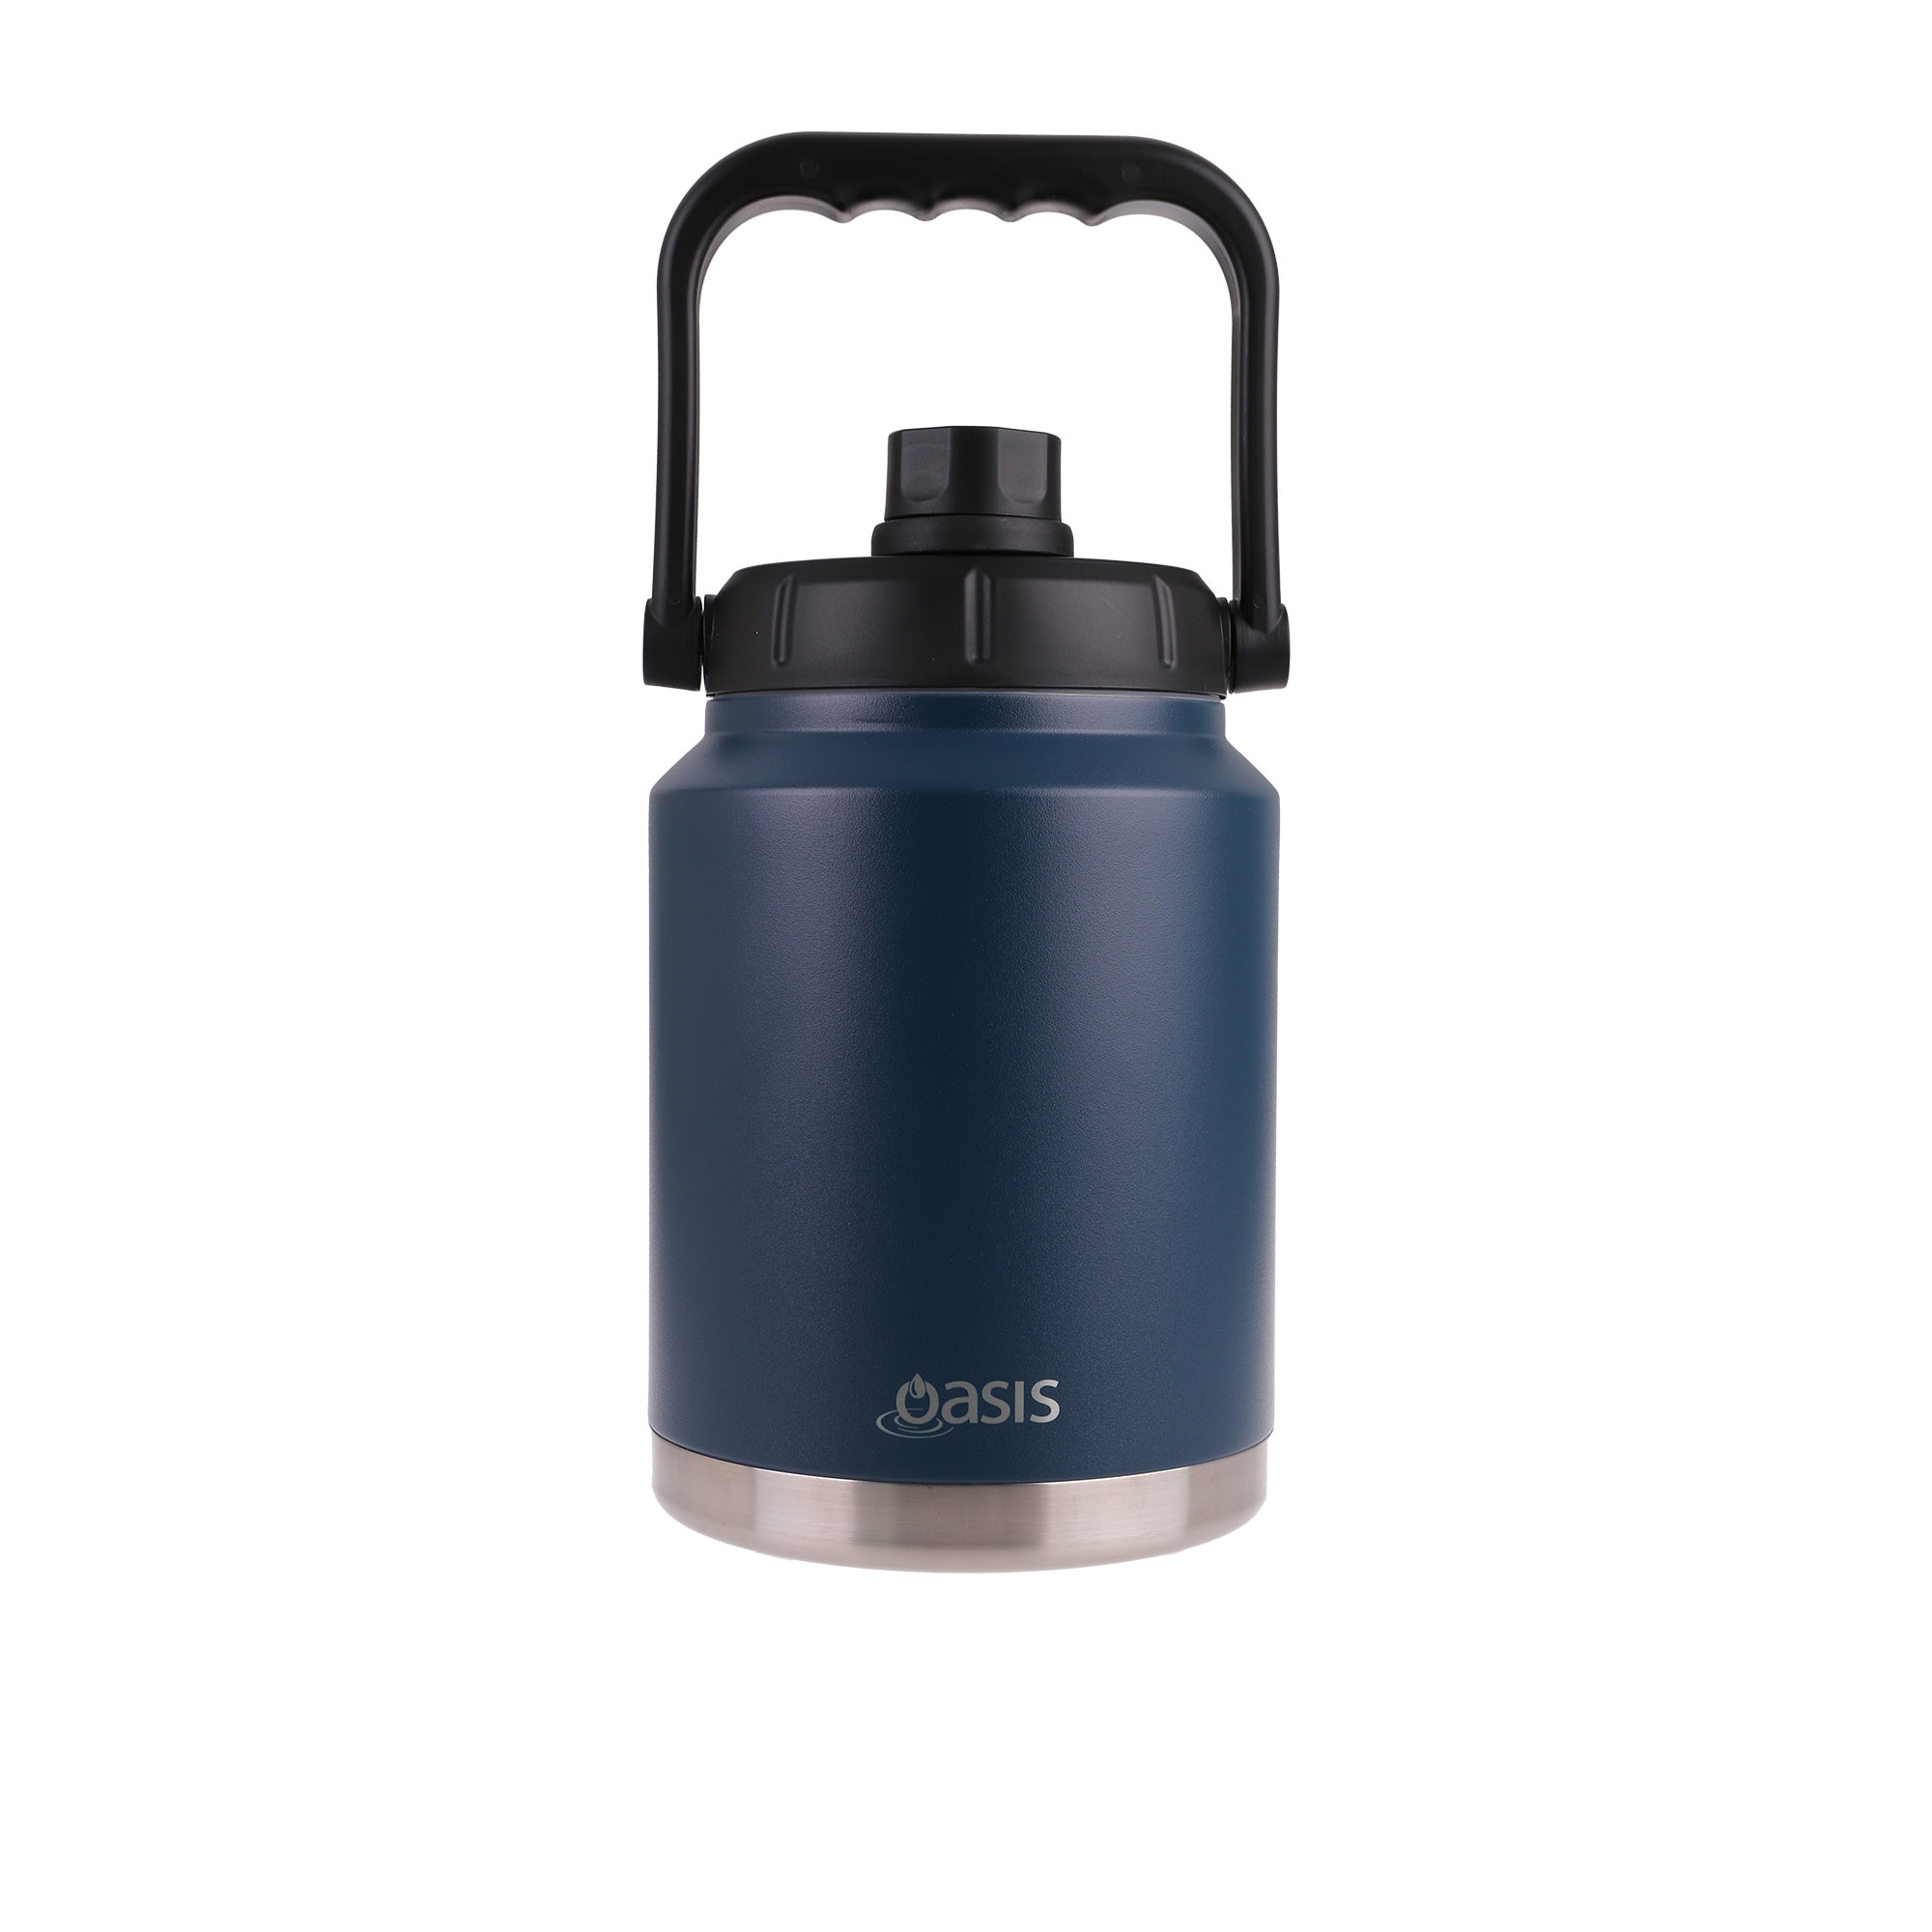 Oasis Insulated Jug with Carry Handle 2.1L Navy Image 1